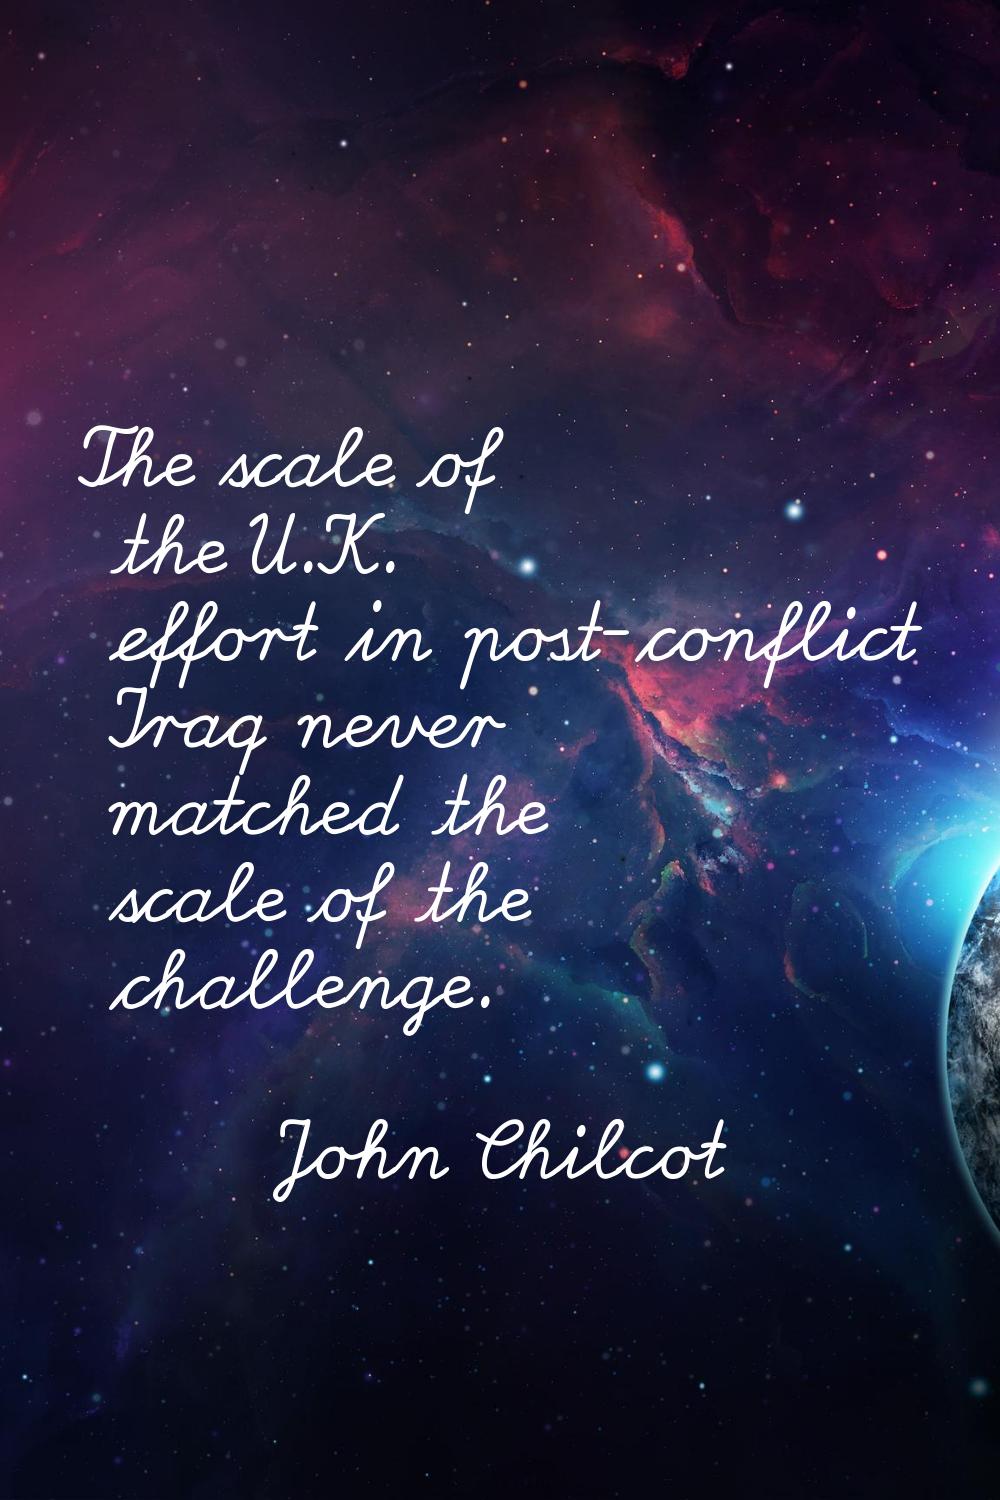 The scale of the U.K. effort in post-conflict Iraq never matched the scale of the challenge.